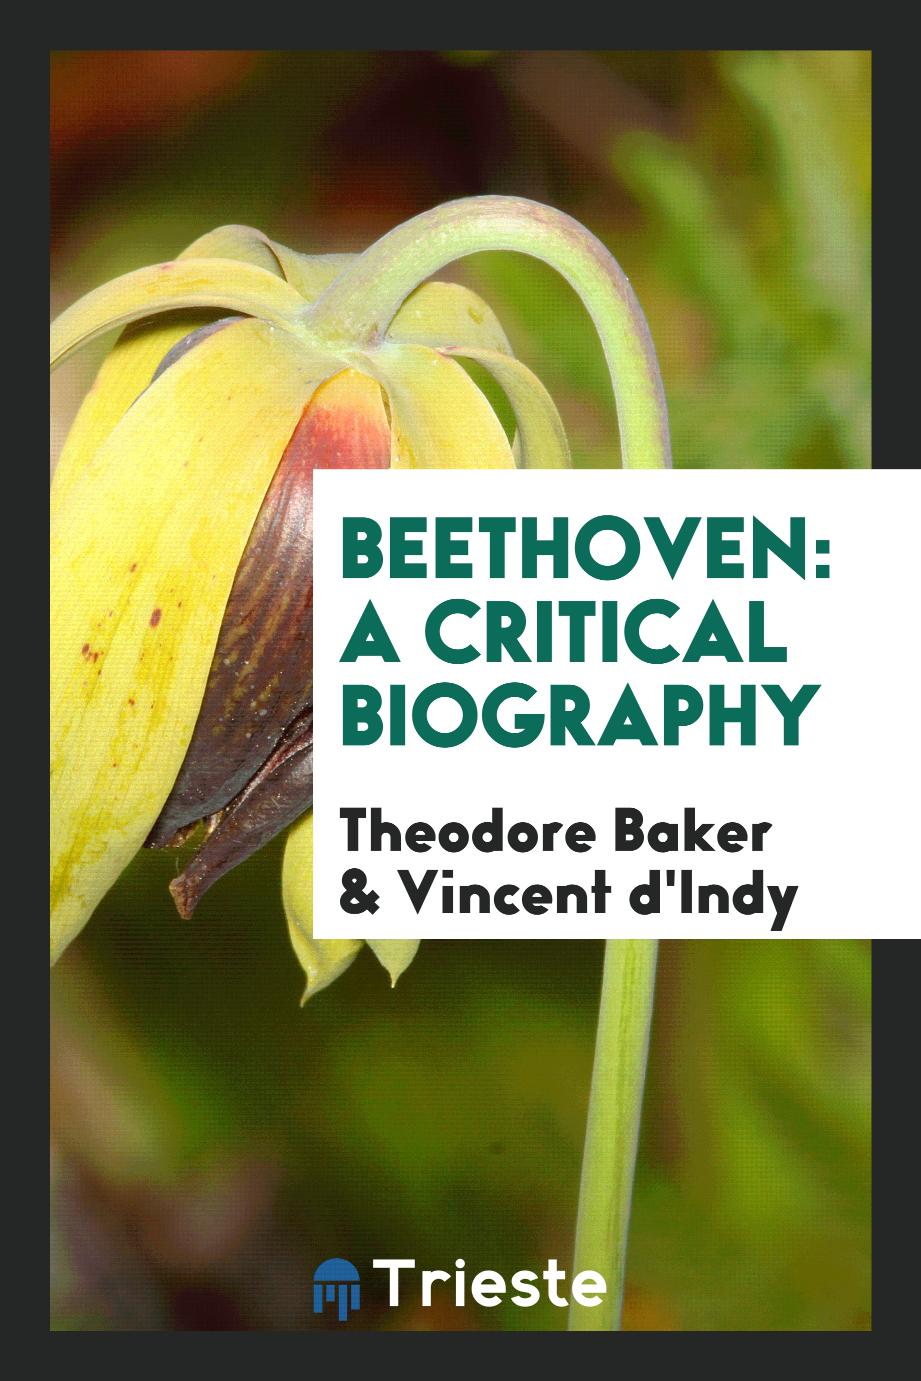 Beethoven: A Critical Biography